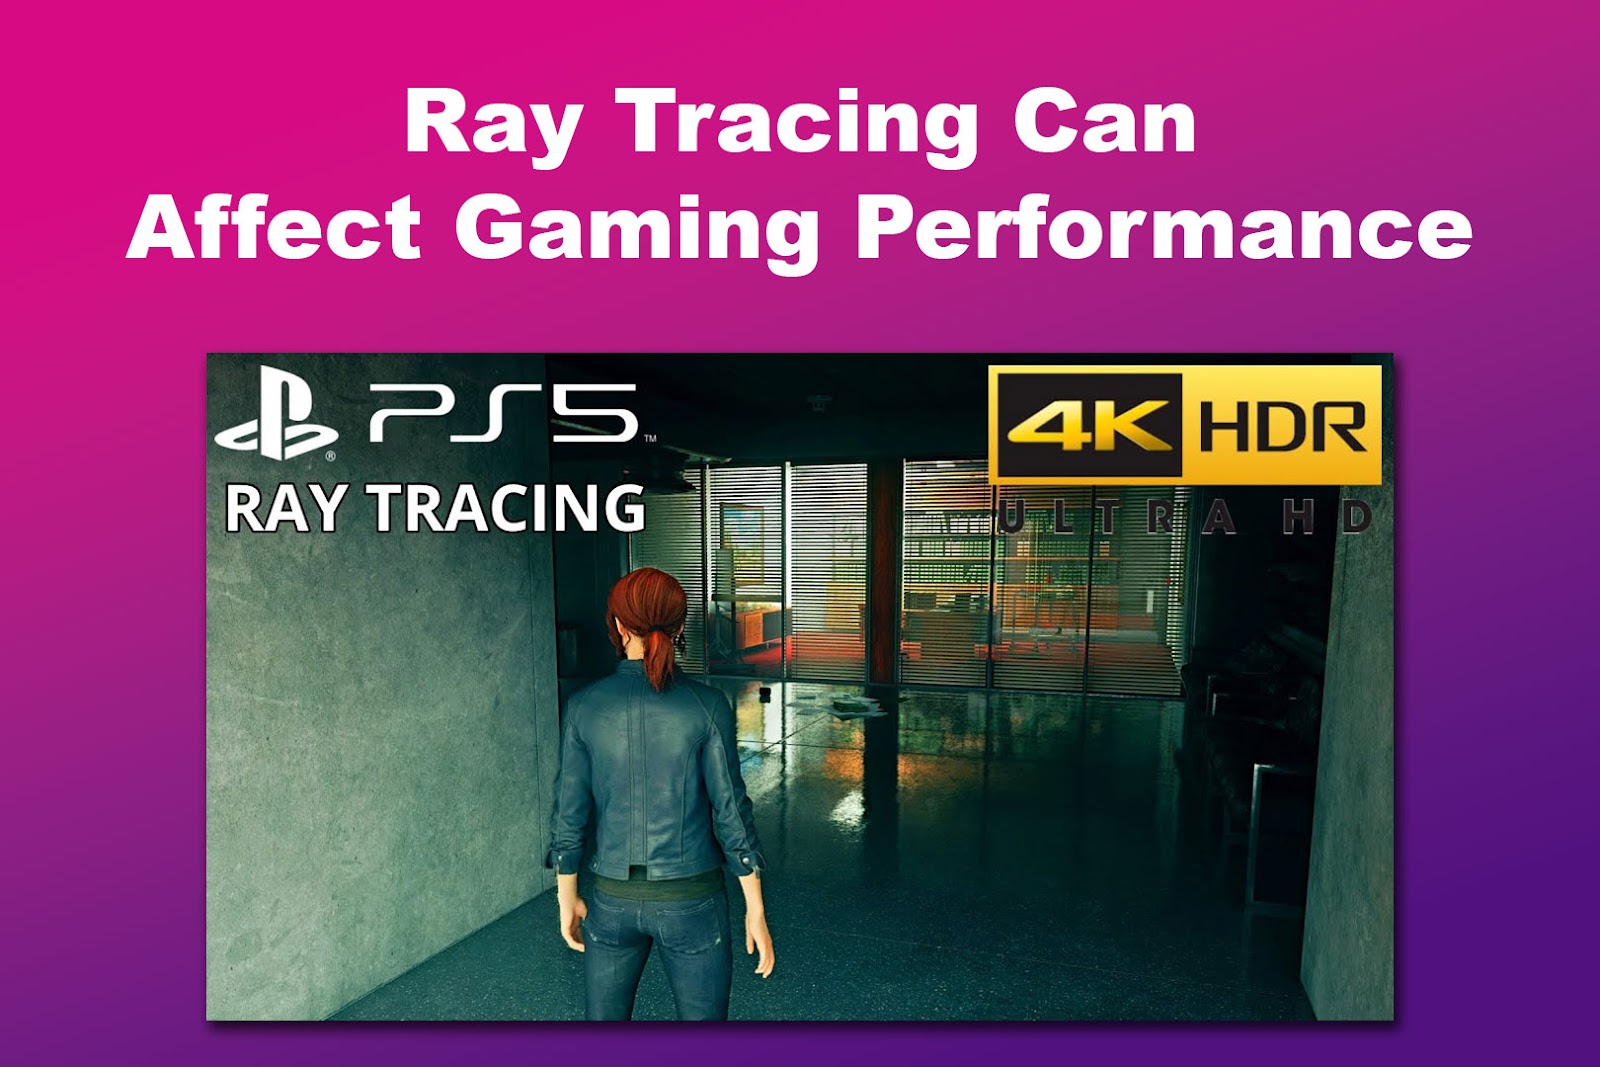 Can Ray Tracing Affect Gaming Performance on PS5